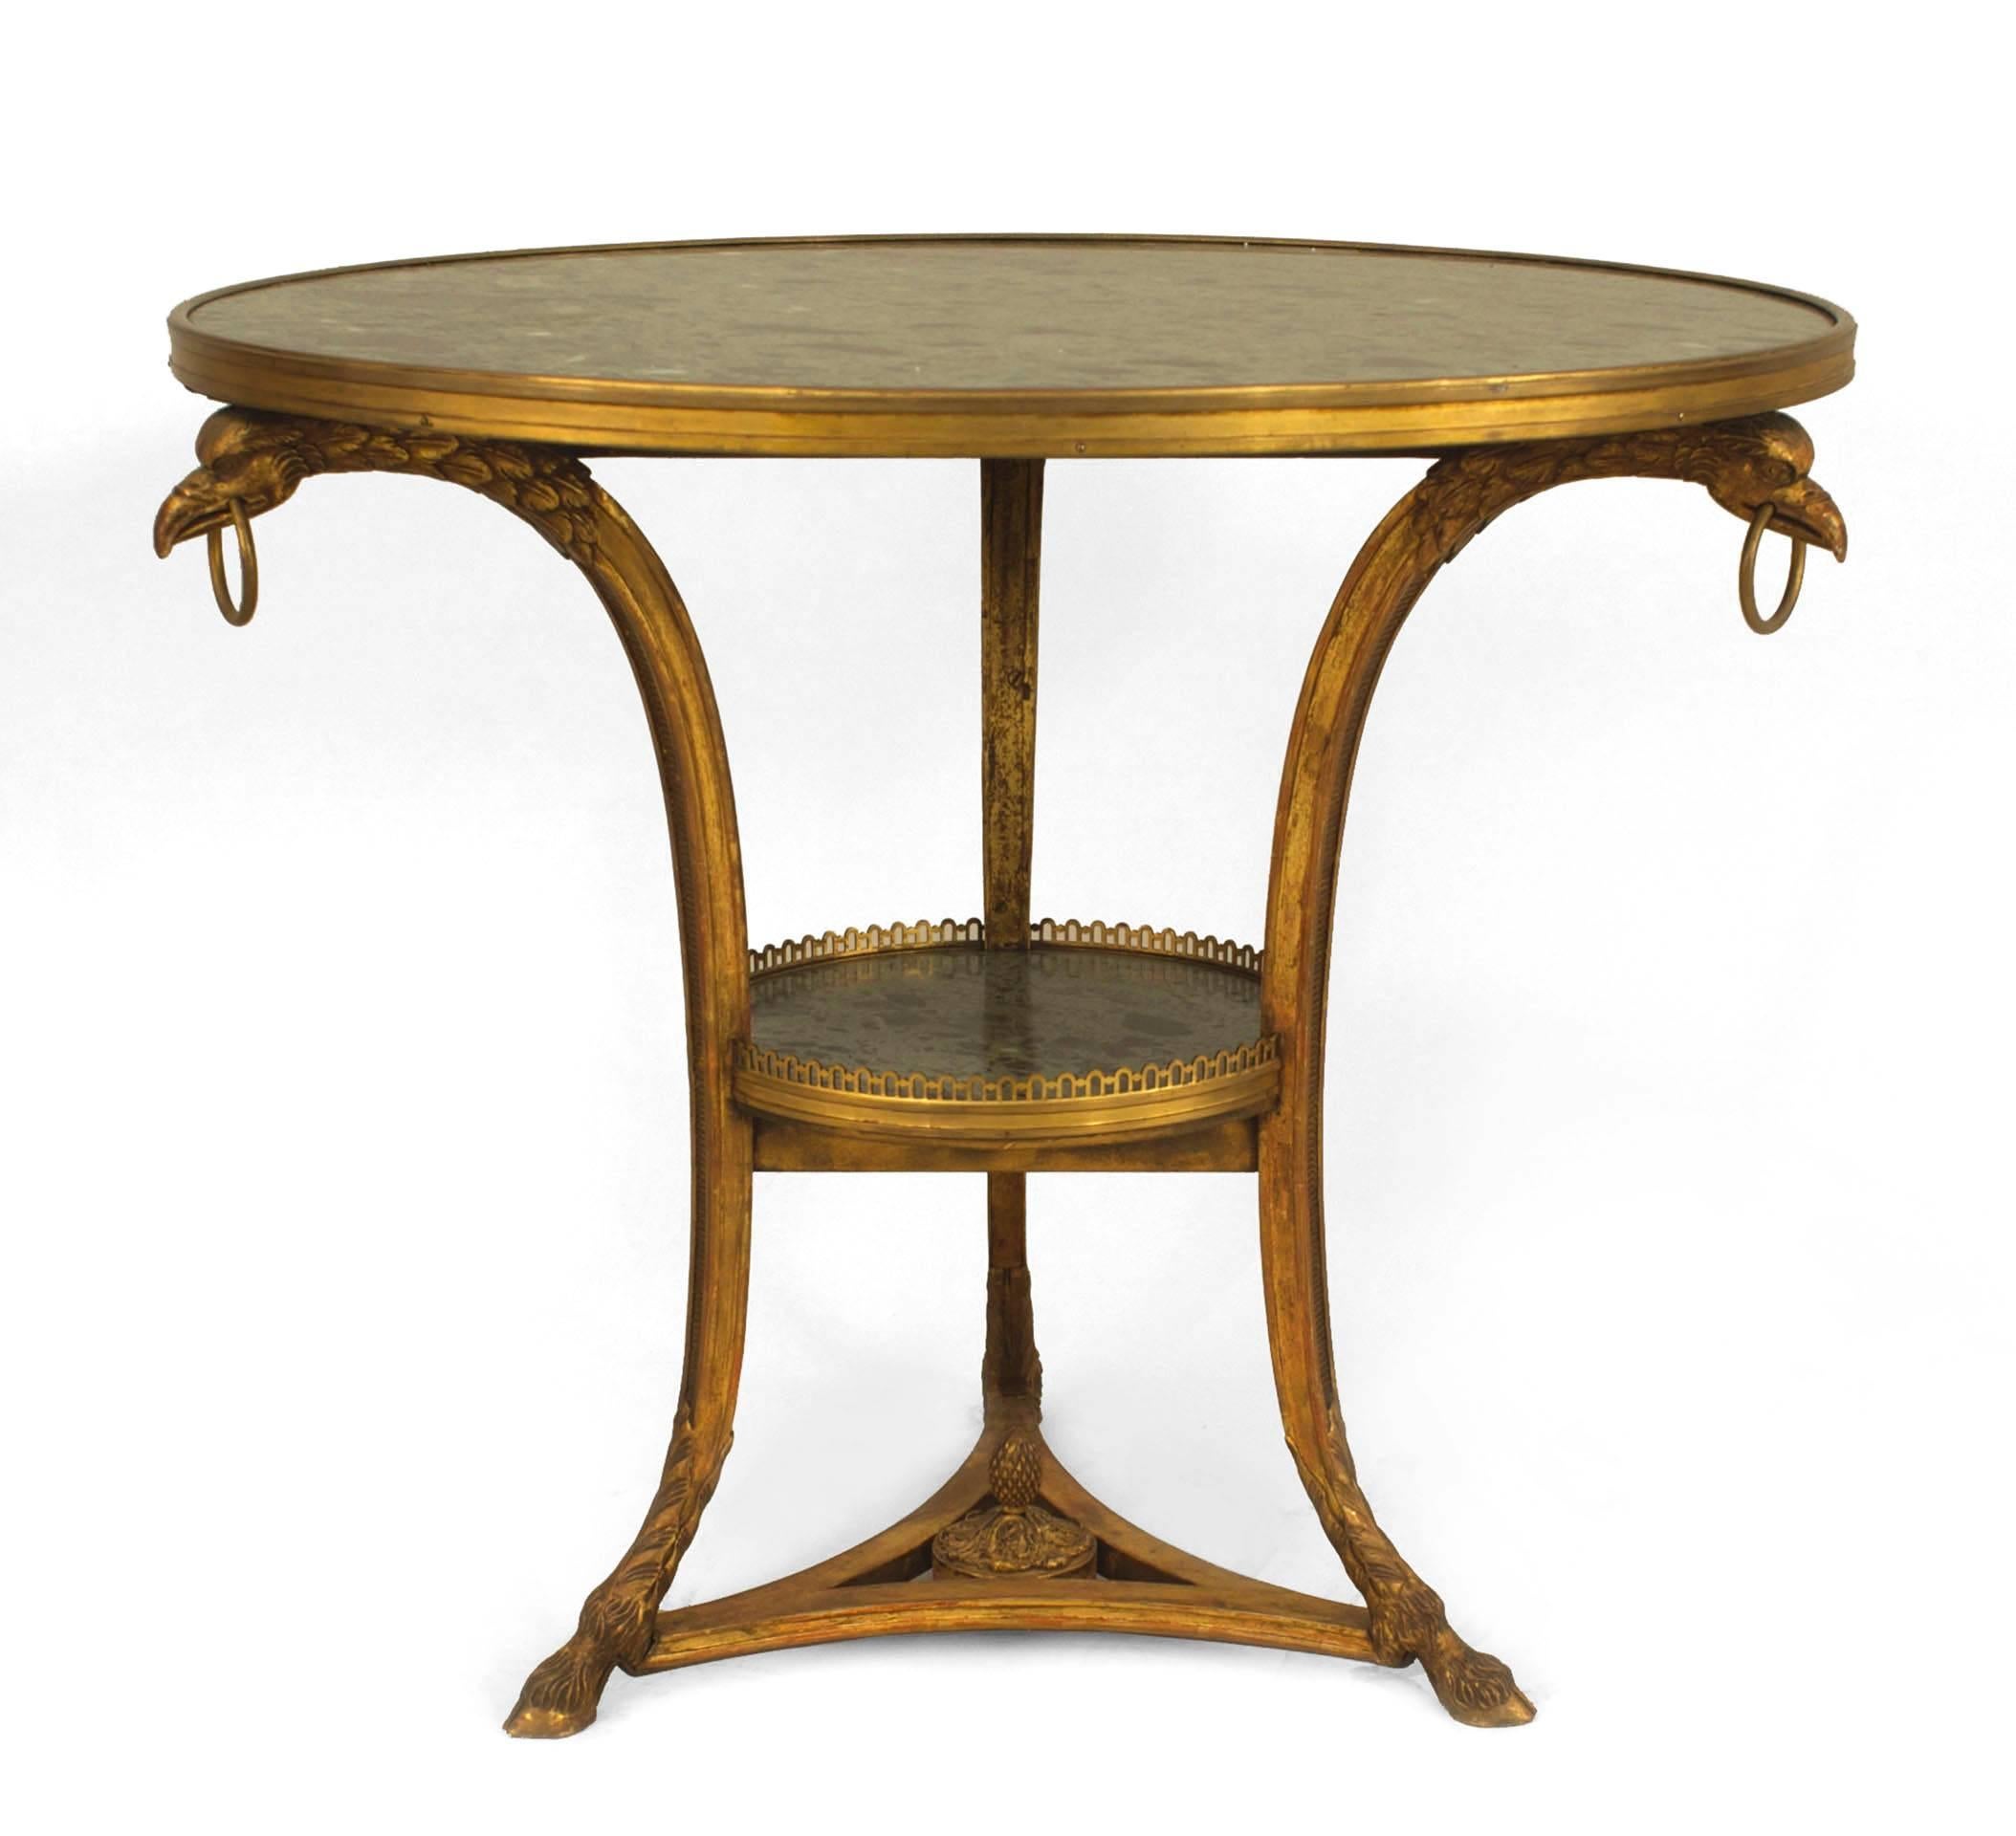 French Empire-style (19th Century) round gueridon table with 3 legged gilt wood bird head legs and green marble top and shelf.
